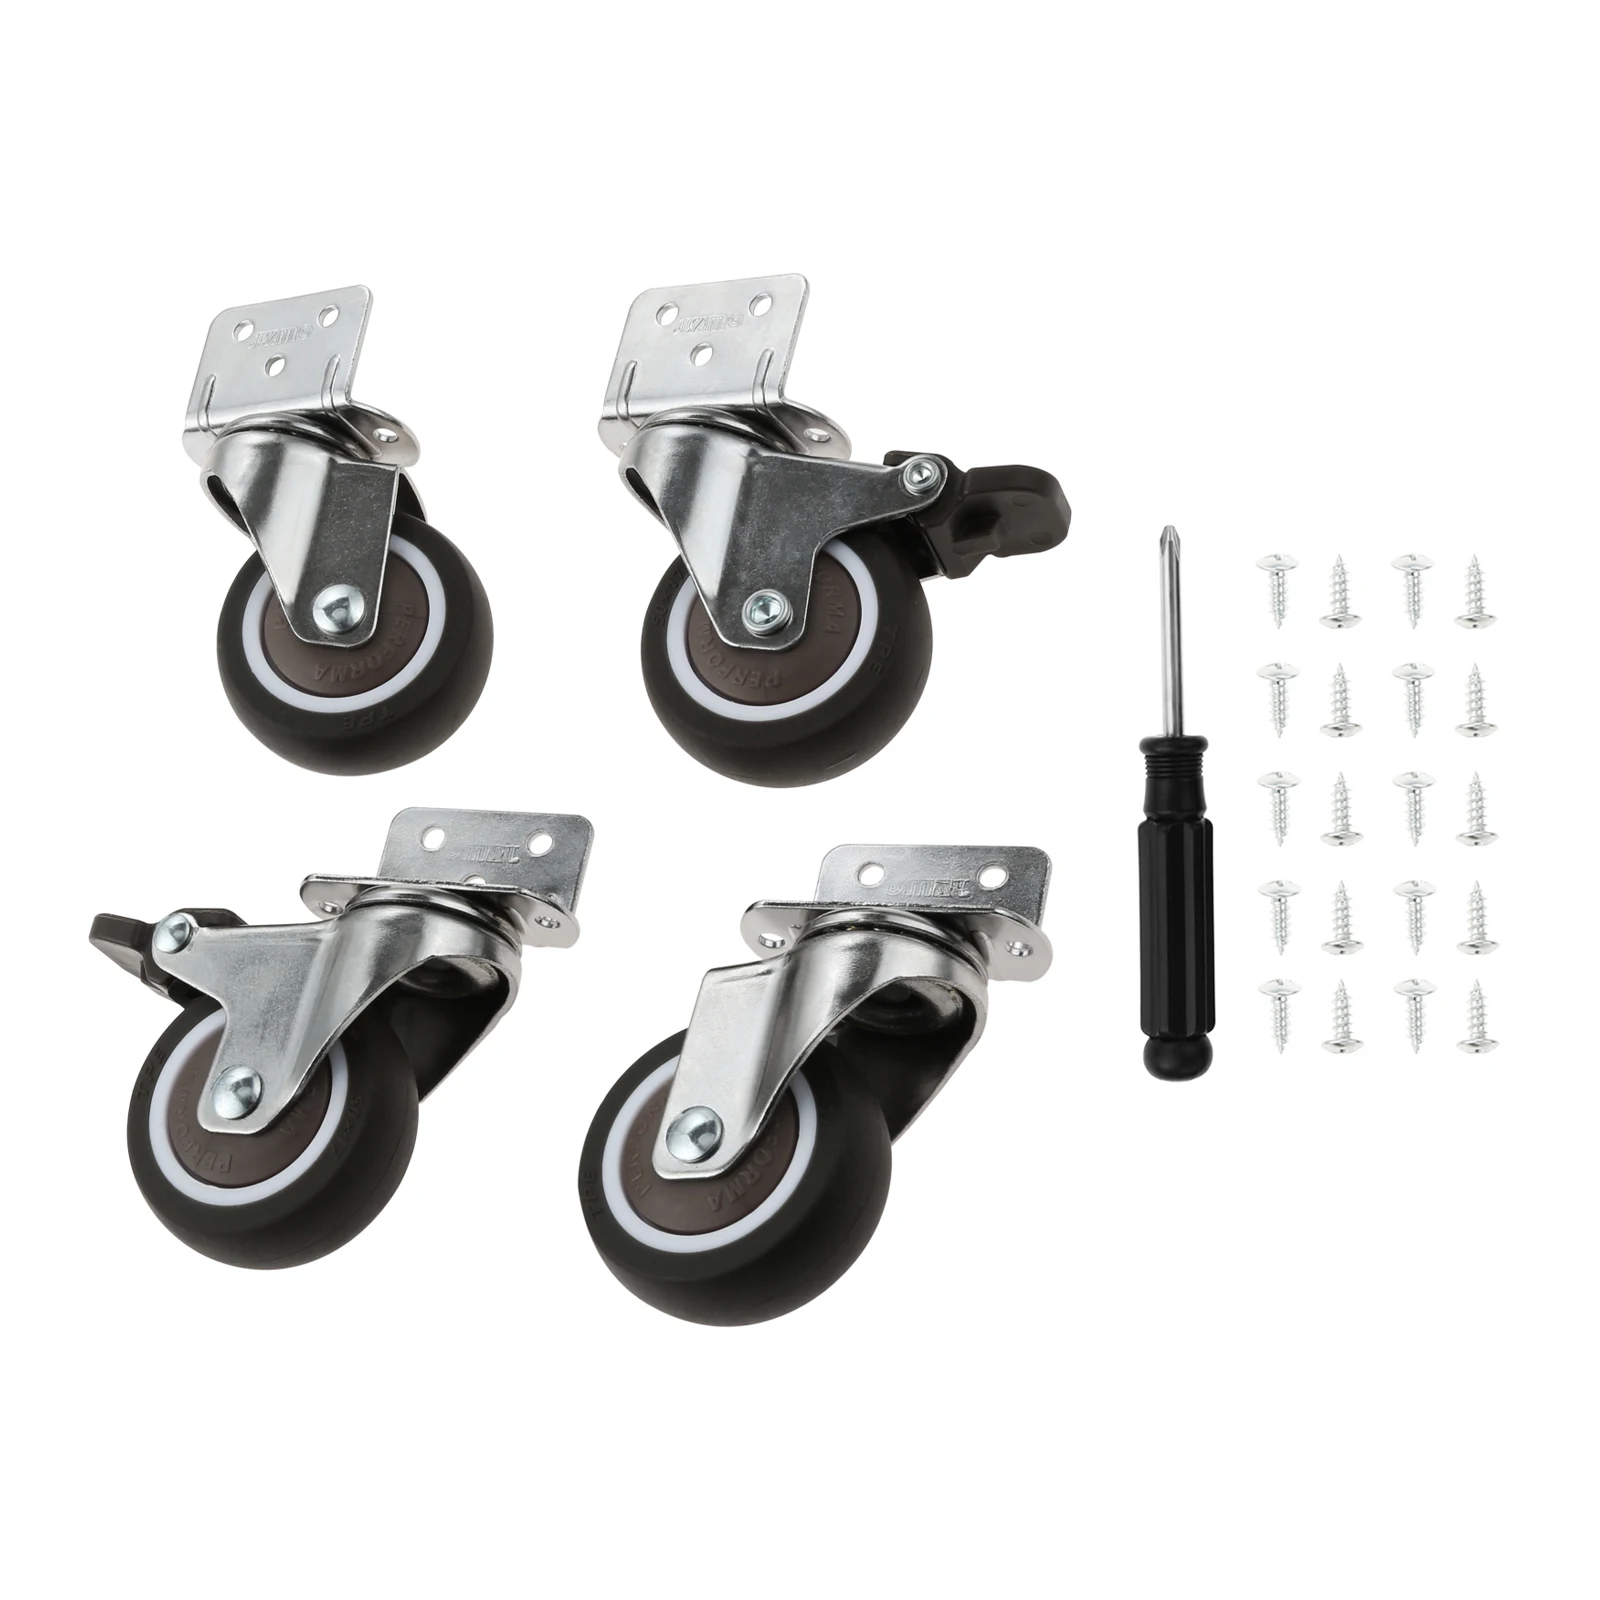 4pcs 2Inch L-shaped Plate Swivel Caster without/with Brake TPE Mute Wheels Rotate 360 Degree Replace Table Chair Cabinet Cribs